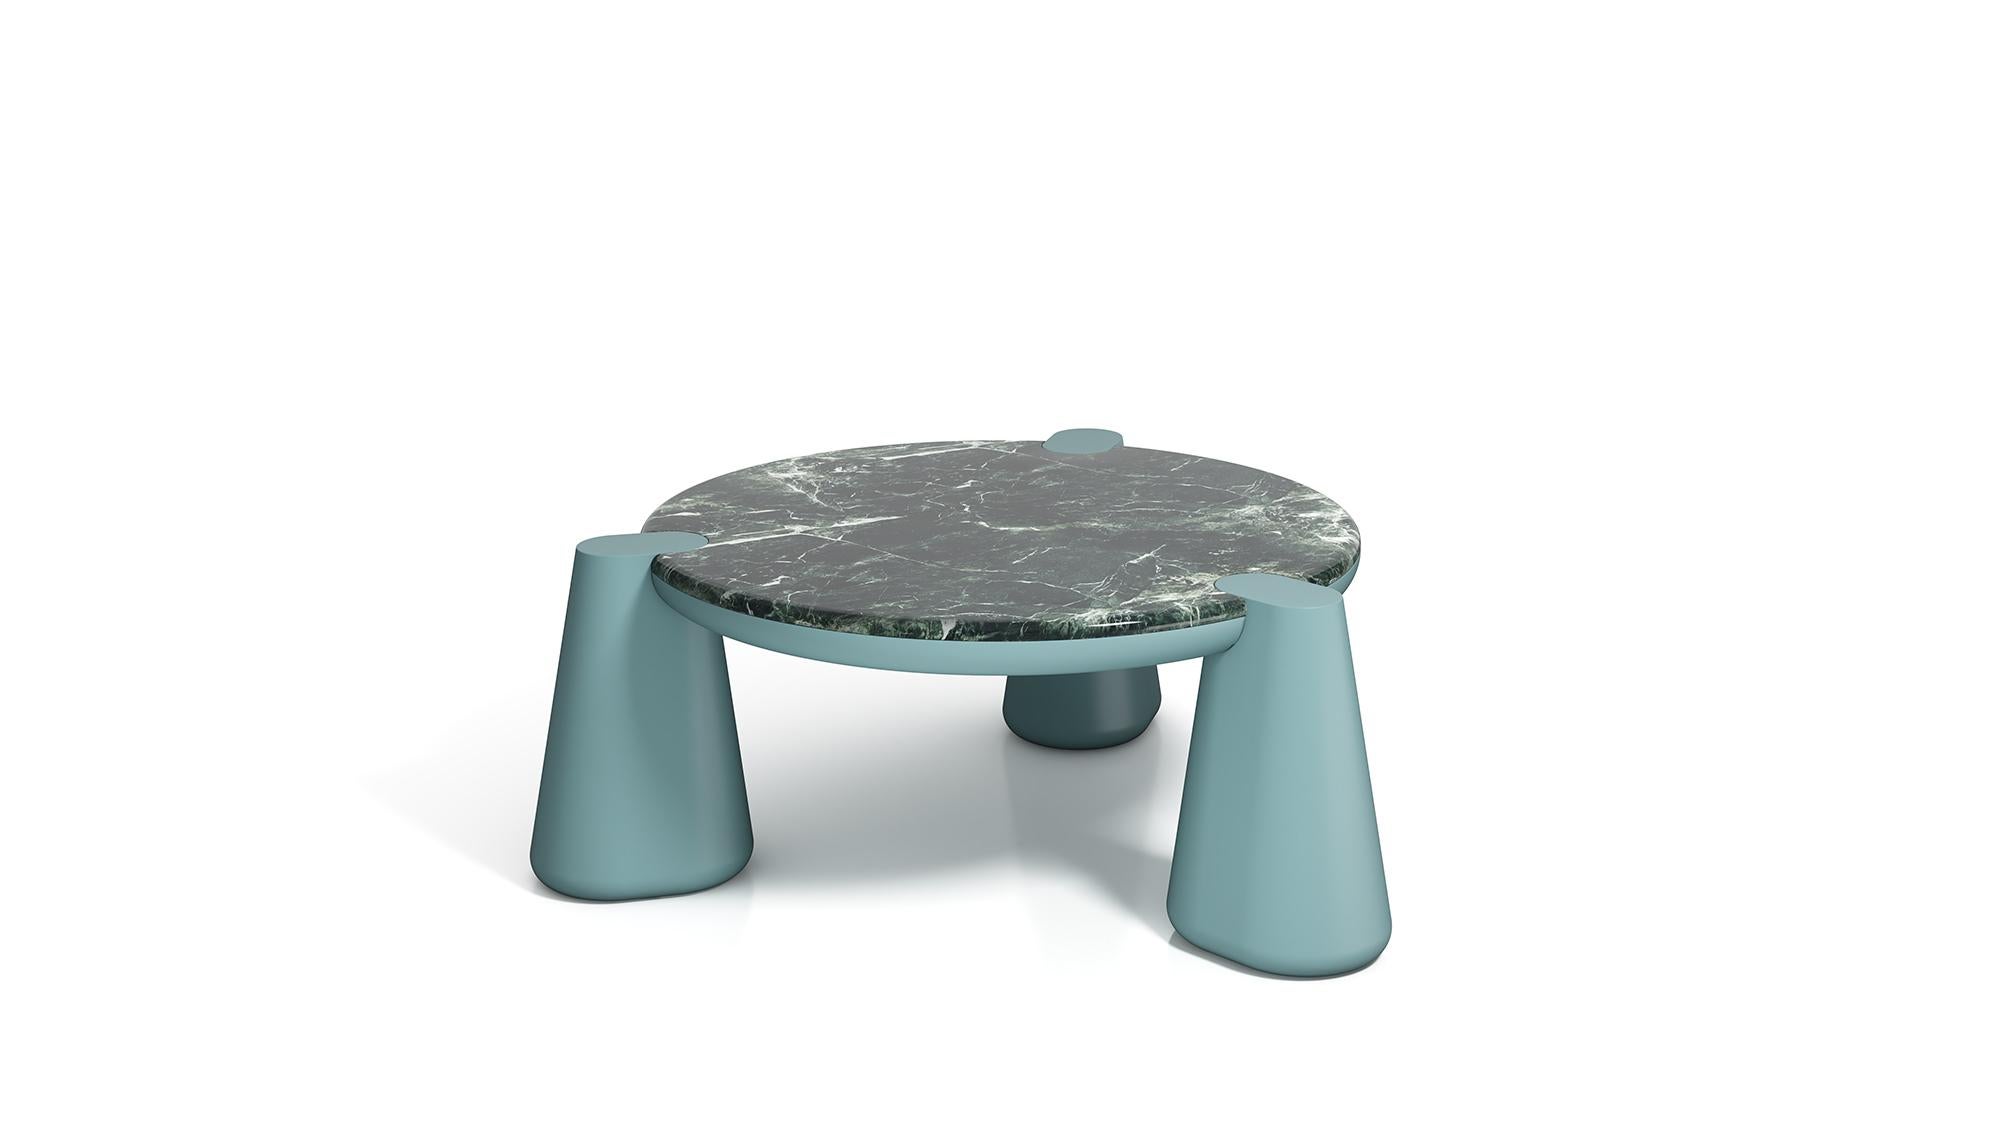 21st Century Elena Salmistraro CoffeeTable Polyurethane PintaVerde Marble Glossy In New Condition For Sale In Tezze sul Brenta, IT